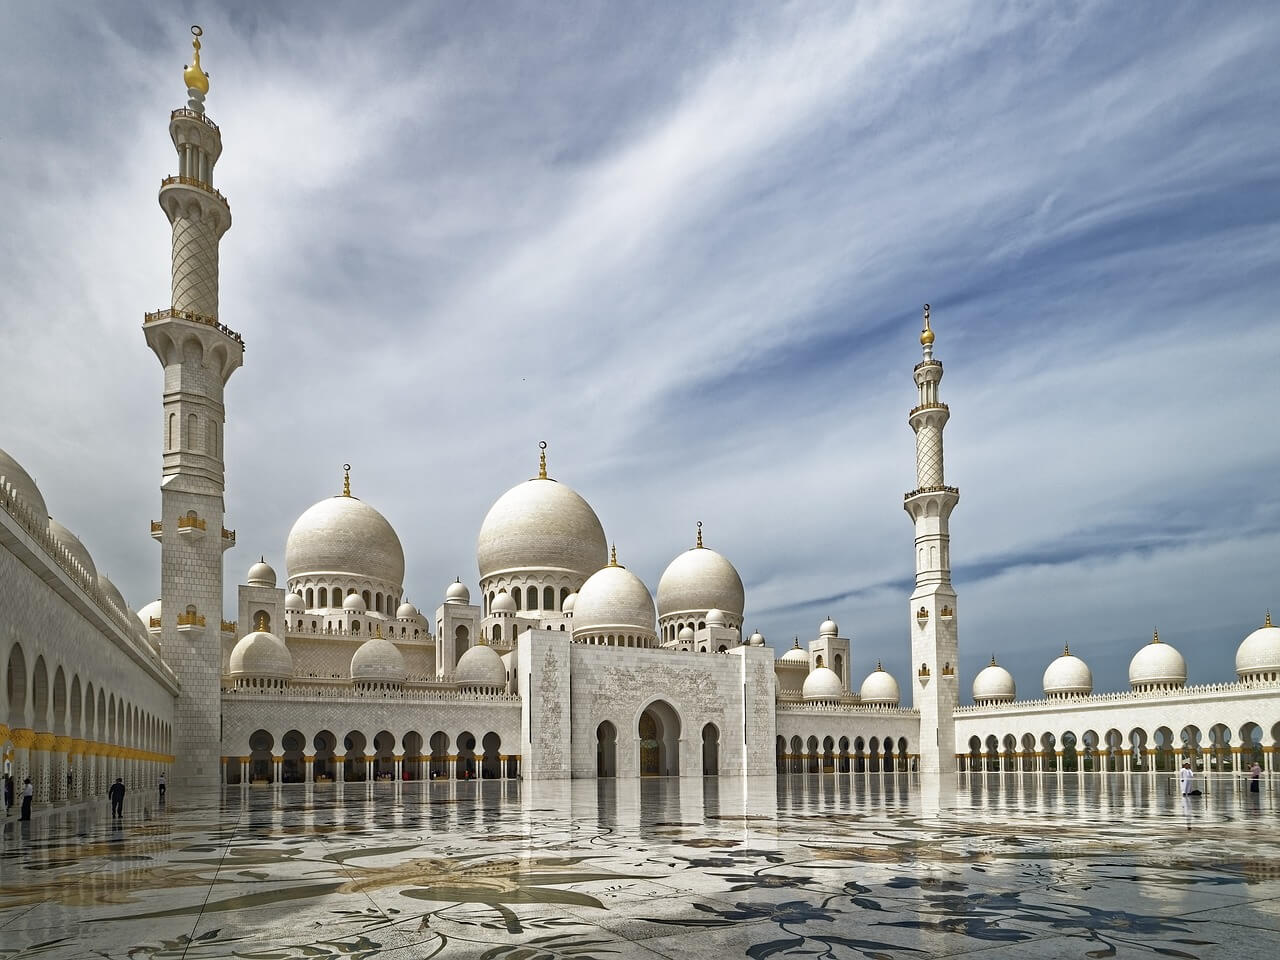 Sheikh Zayed Grand Mosque - one of the most iconic cultural sites in Abu Dhabi